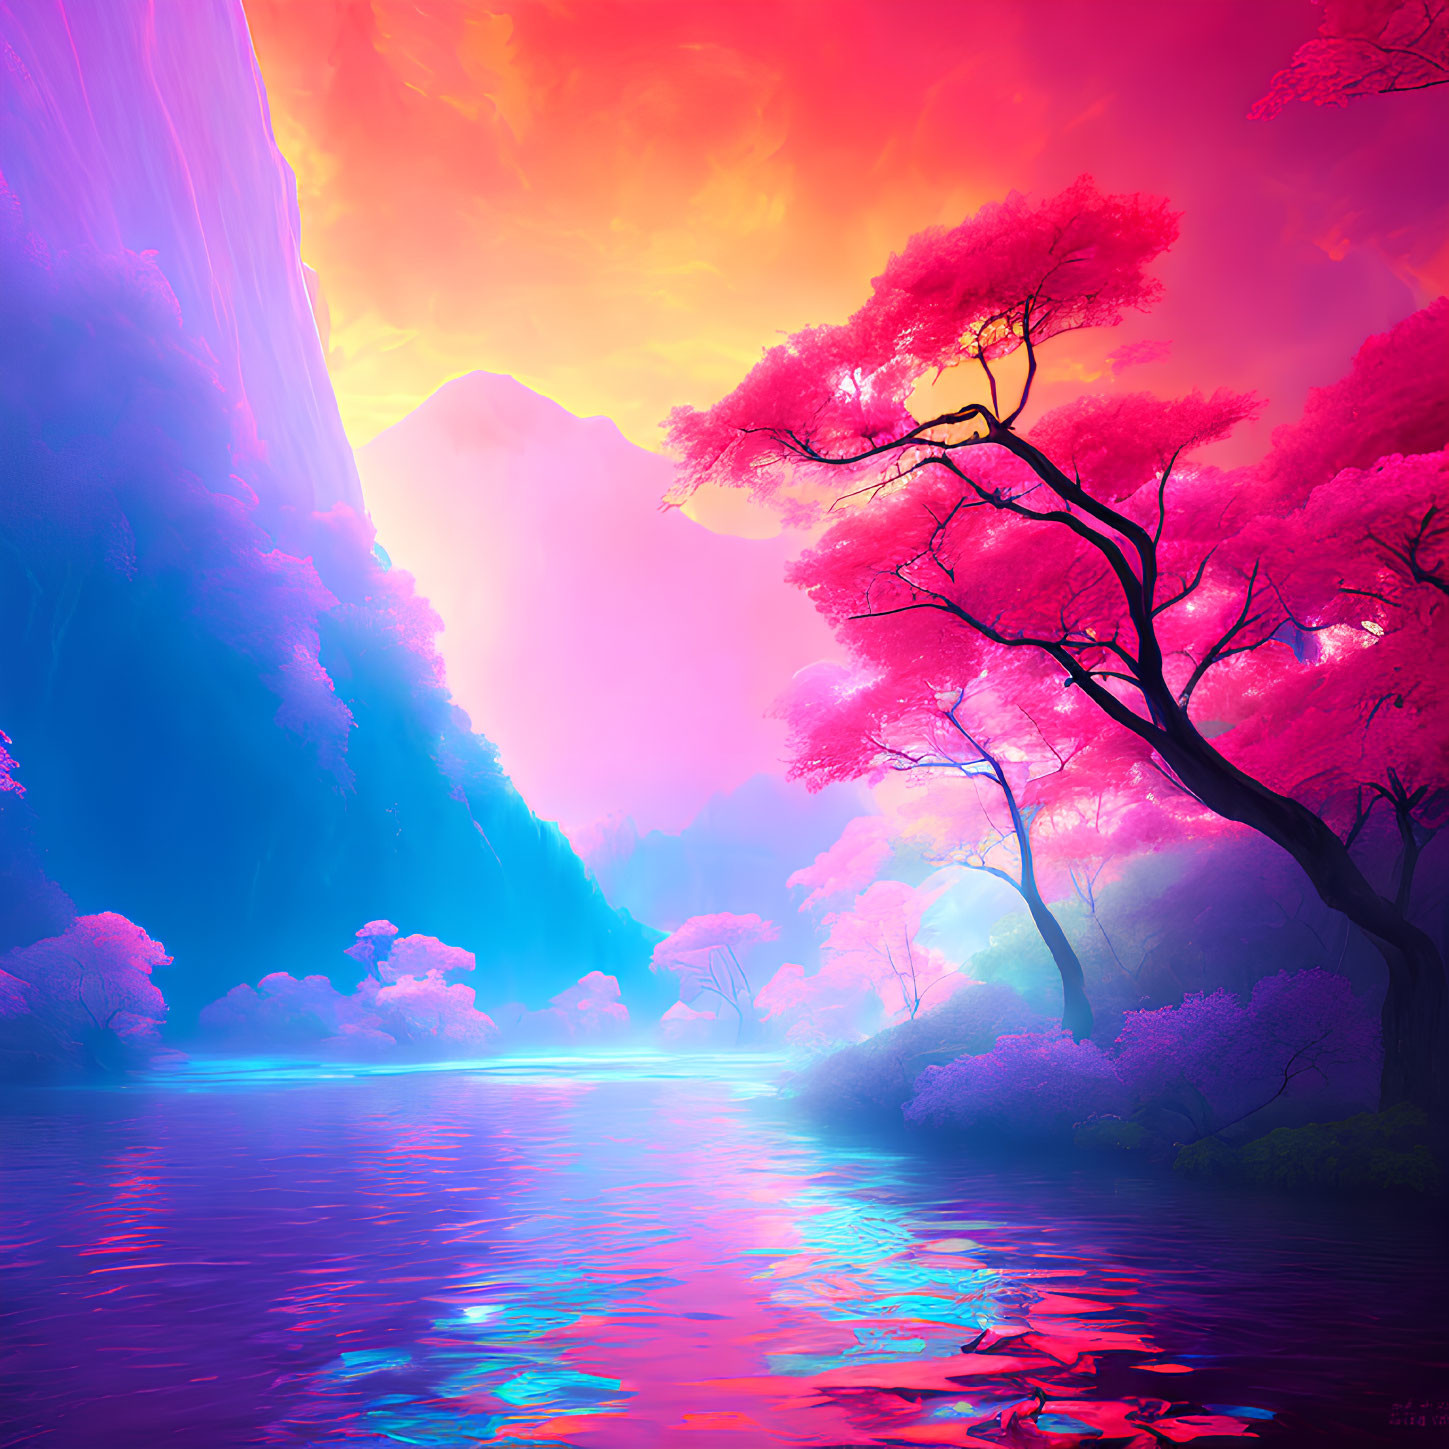 Colorful fantasy landscape with pink and blue sky, glowing river, and mountain backdrop